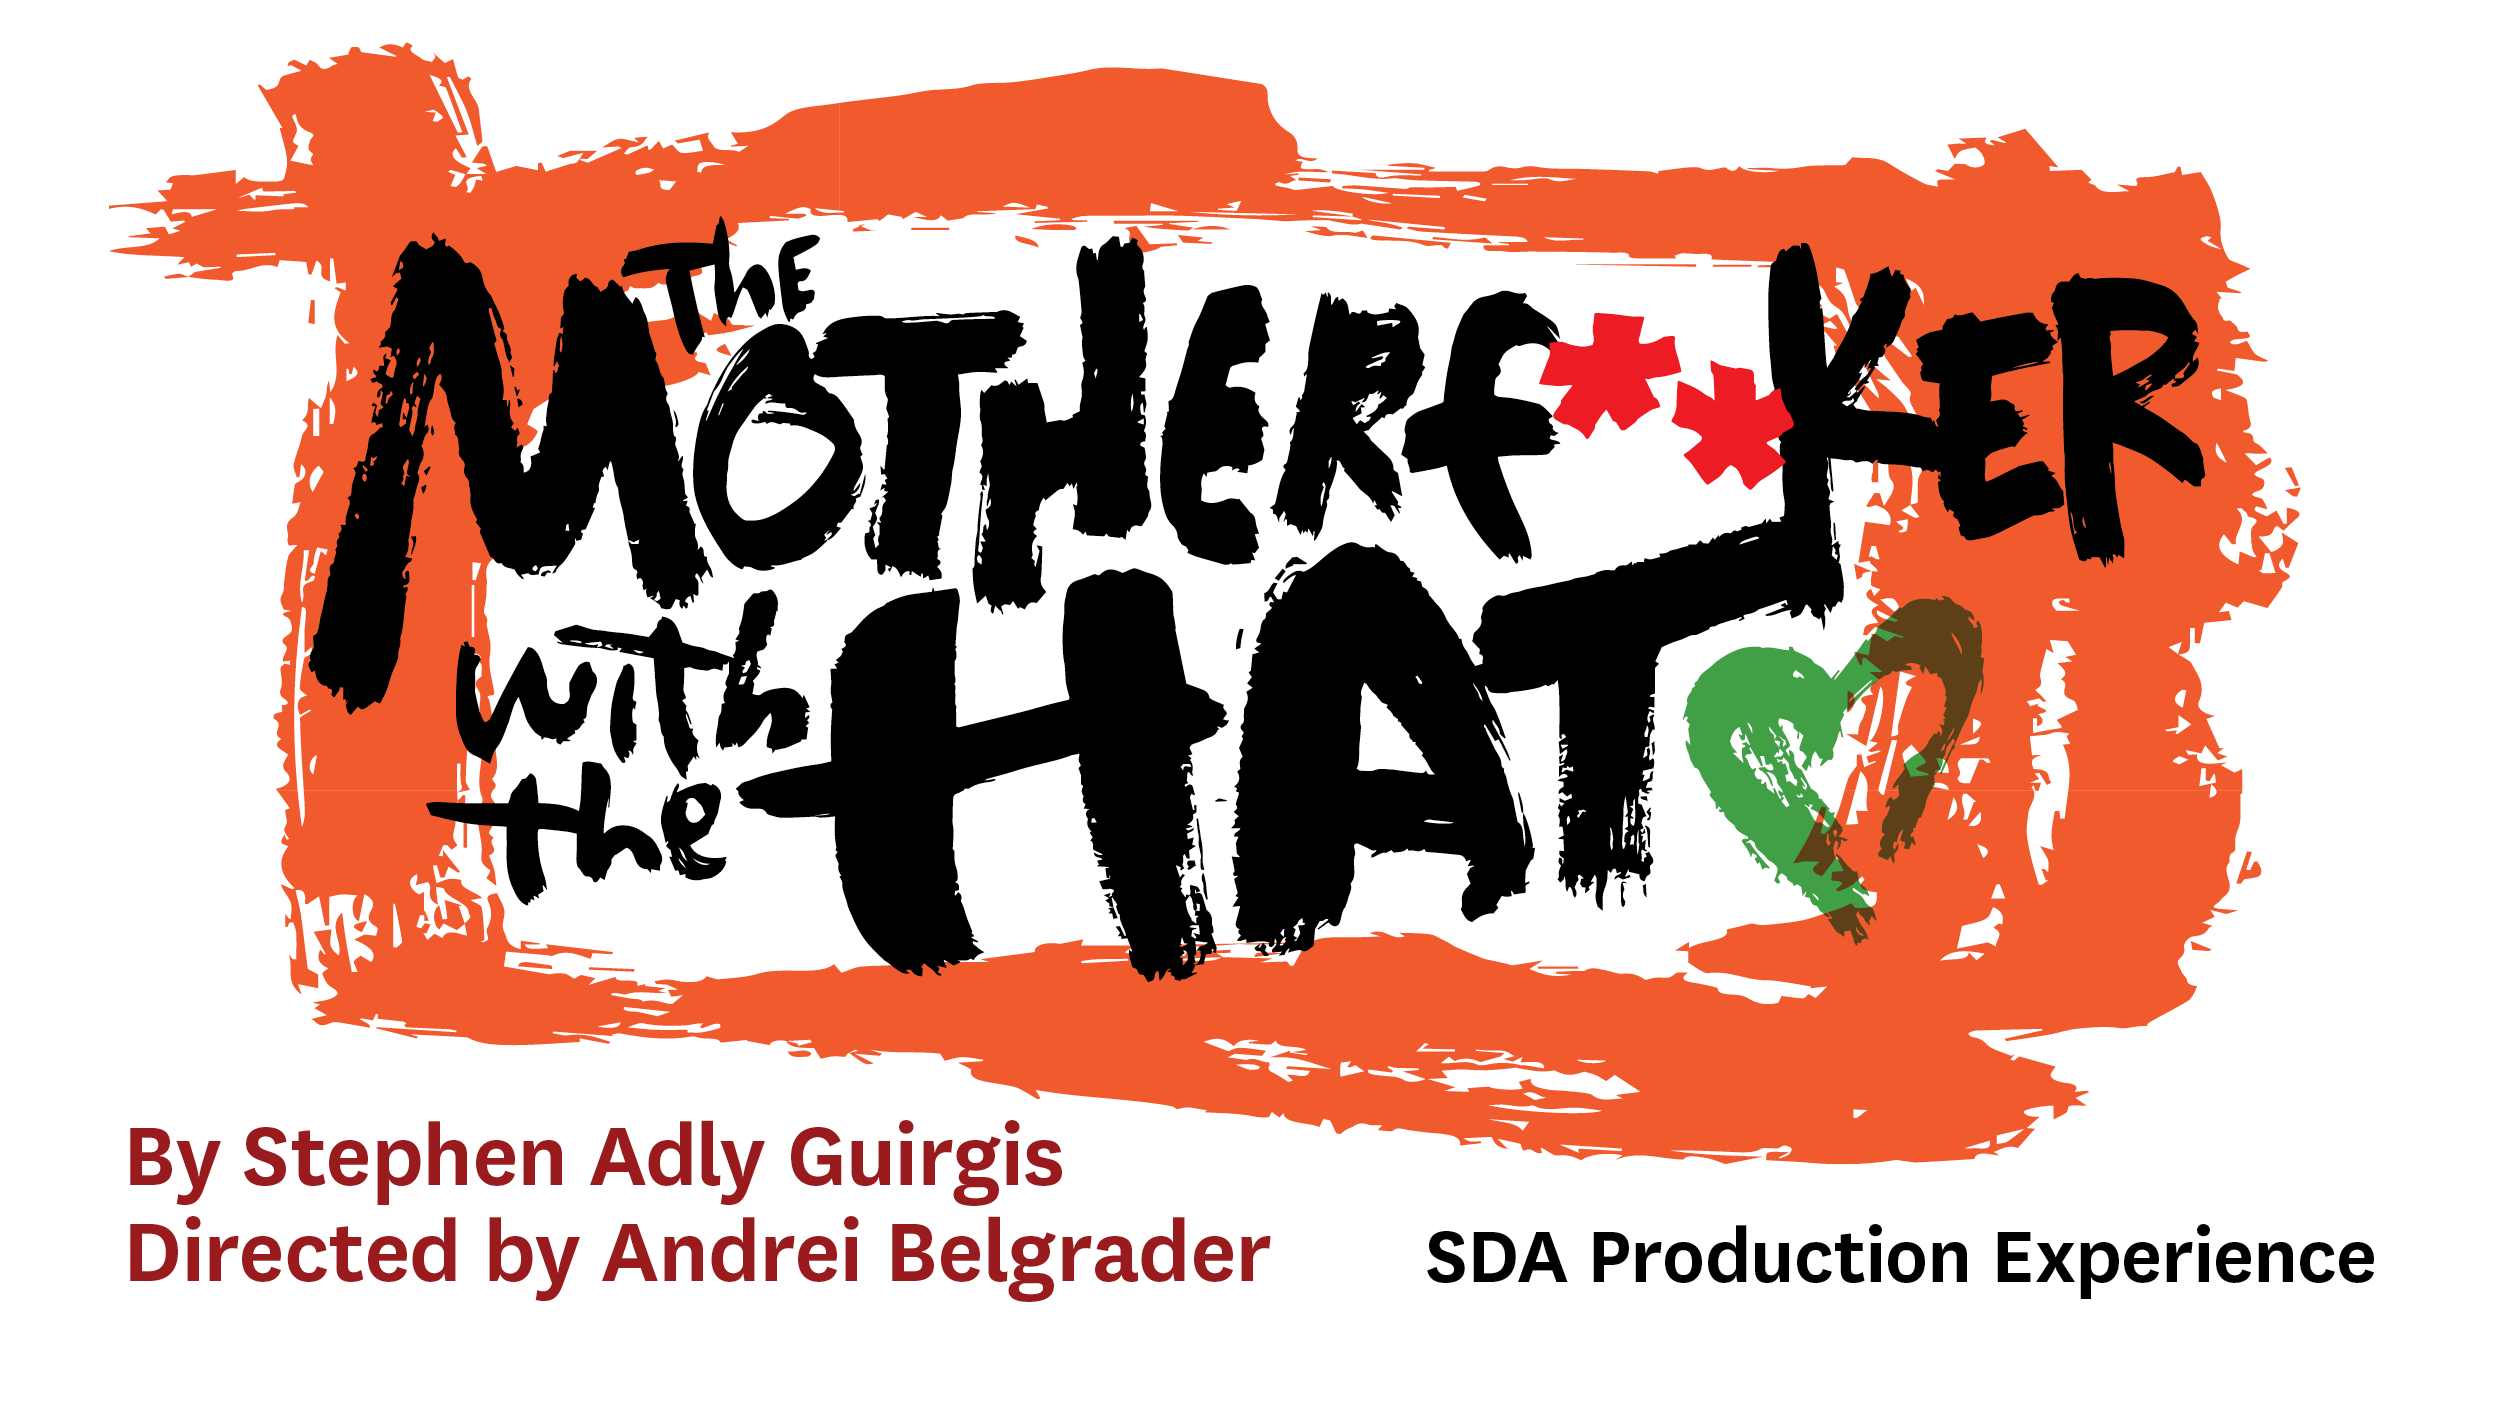 The Motherf**ker with the Hat art